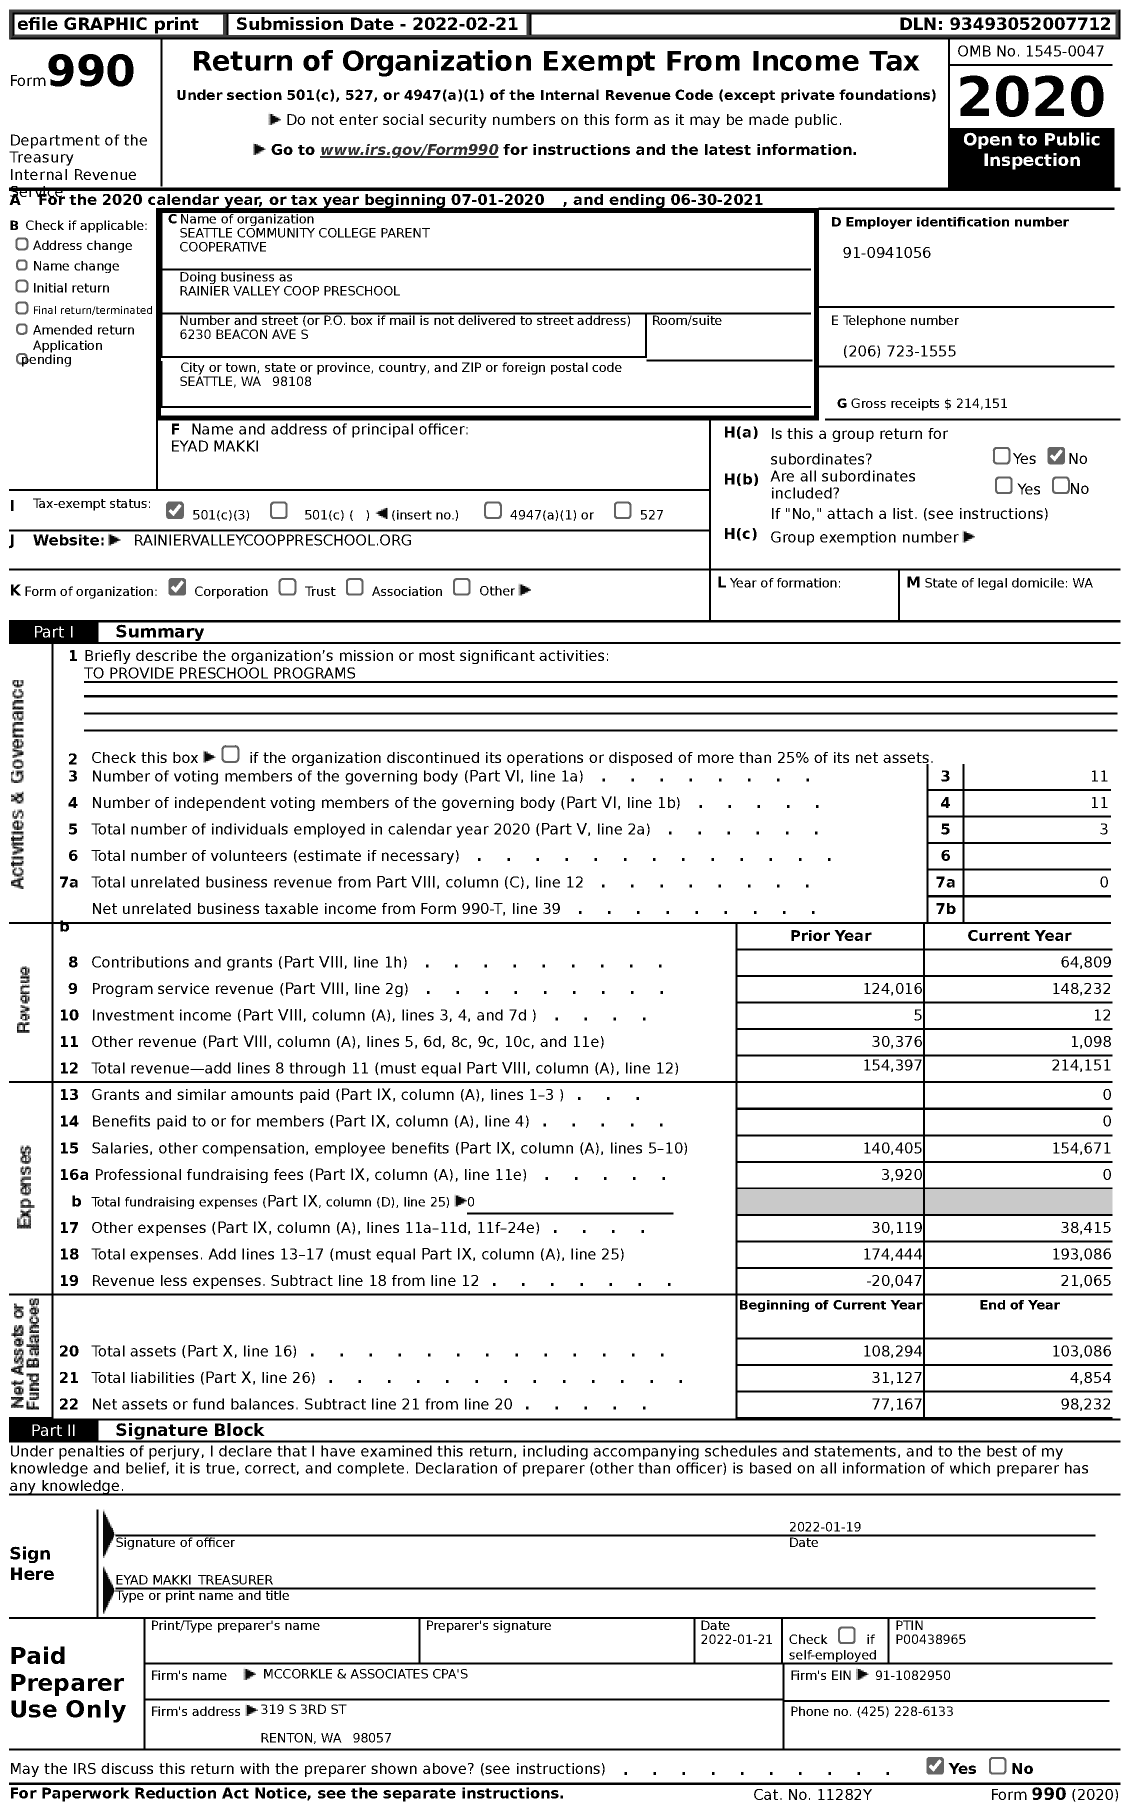 Image of first page of 2020 Form 990 for Seattle Community College Parent Cooperative